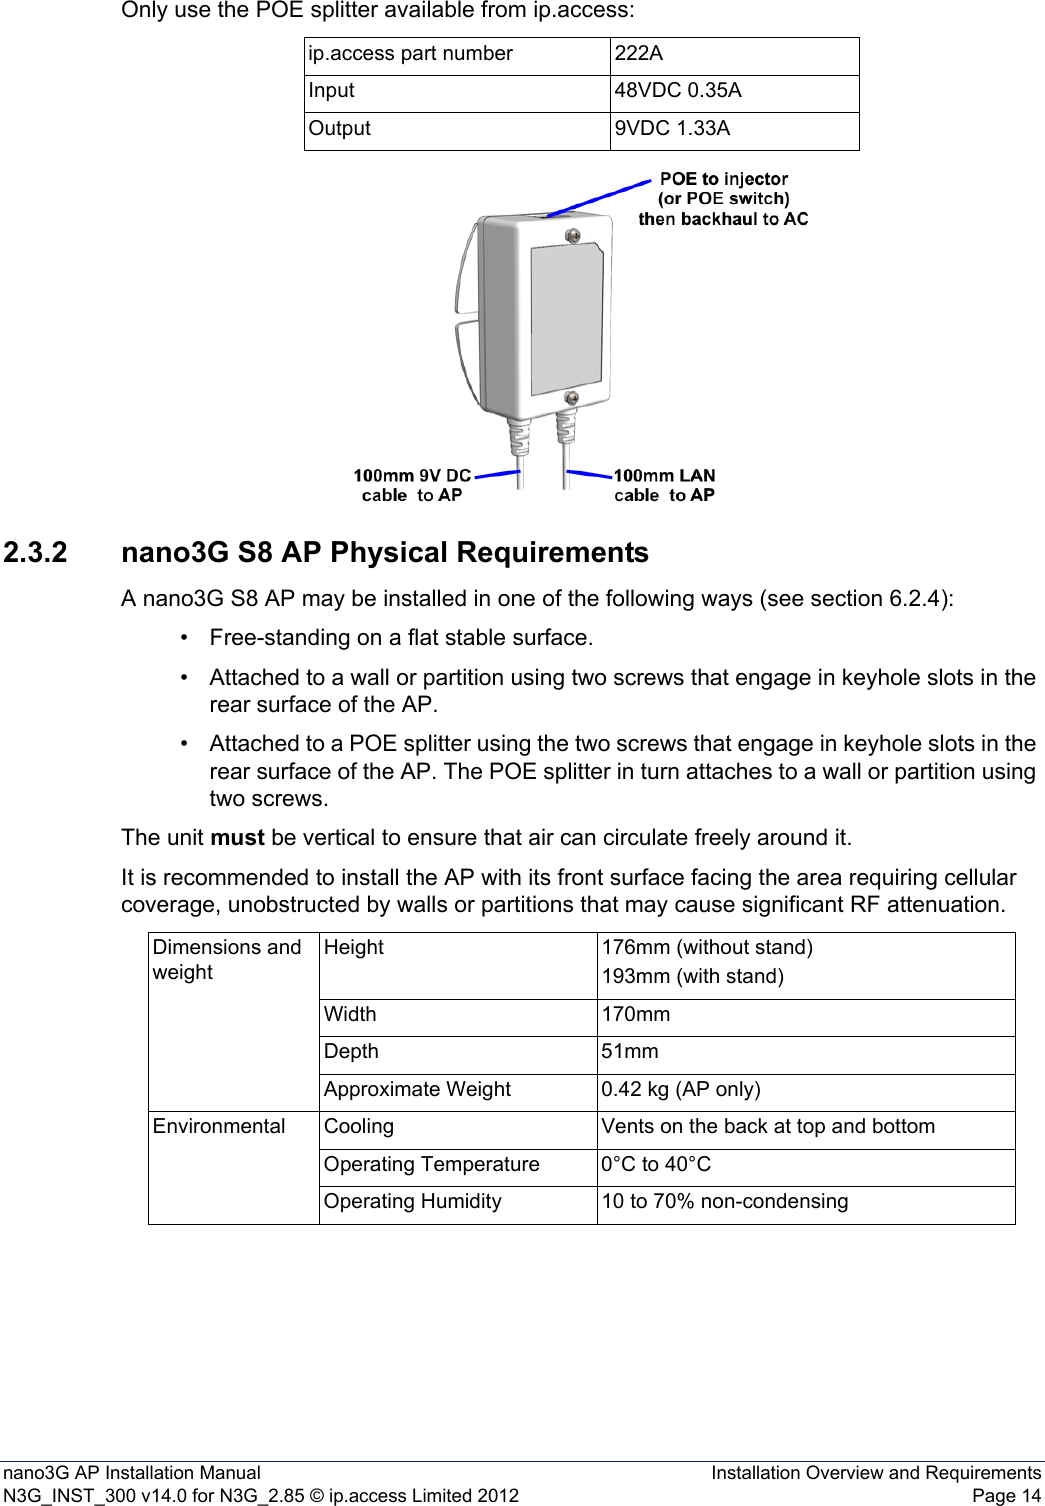 nano3G AP Installation Manual Installation Overview and RequirementsN3G_INST_300 v14.0 for N3G_2.85 © ip.access Limited 2012 Page 14Only use the POE splitter available from ip.access:2.3.2 nano3G S8 AP Physical RequirementsA nano3G S8 AP may be installed in one of the following ways (see section 6.2.4):• Free-standing on a flat stable surface.• Attached to a wall or partition using two screws that engage in keyhole slots in the rear surface of the AP.• Attached to a POE splitter using the two screws that engage in keyhole slots in the rear surface of the AP. The POE splitter in turn attaches to a wall or partition using two screws.The unit must be vertical to ensure that air can circulate freely around it.It is recommended to install the AP with its front surface facing the area requiring cellular coverage, unobstructed by walls or partitions that may cause significant RF attenuation.ip.access part number 222AInput 48VDC 0.35AOutput 9VDC 1.33ADimensions and weightHeight 176mm (without stand)193mm (with stand)Width 170mmDepth 51mmApproximate Weight 0.42 kg (AP only)Environmental Cooling Vents on the back at top and bottomOperating Temperature 0°C to 40°COperating Humidity 10 to 70% non-condensing